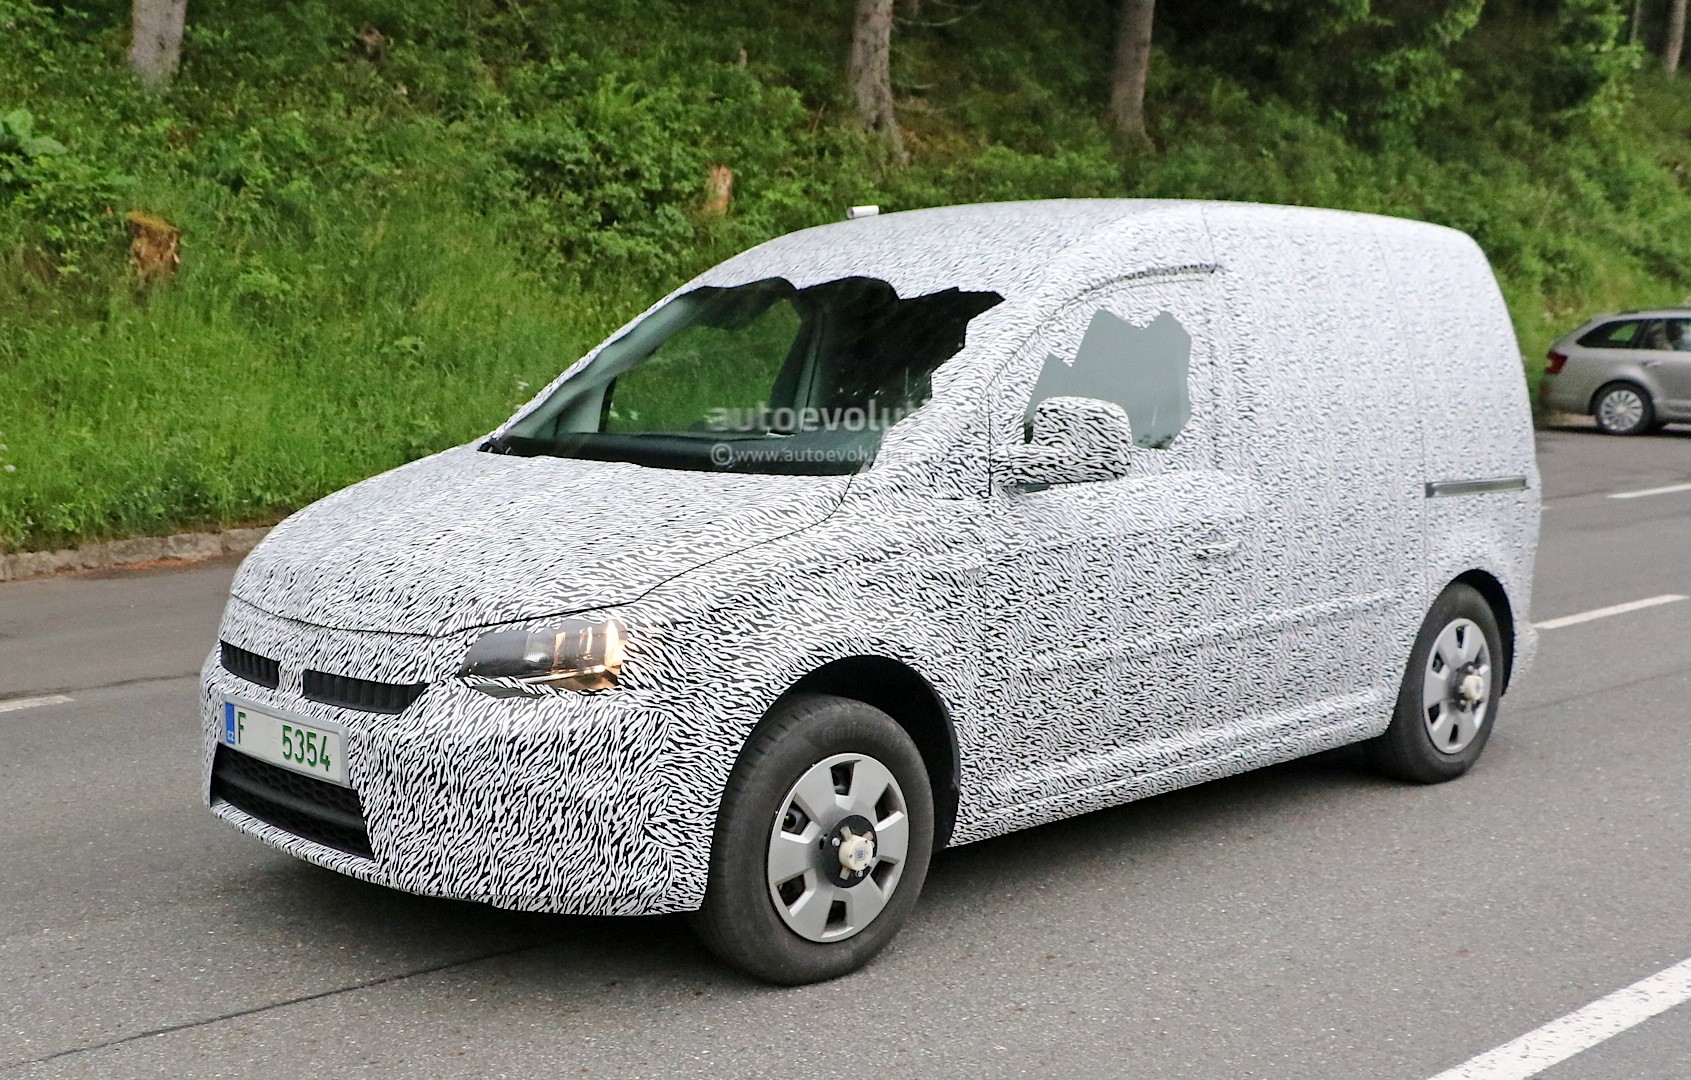 Skoda Roomster Reportedly Axed By Czech Automaker